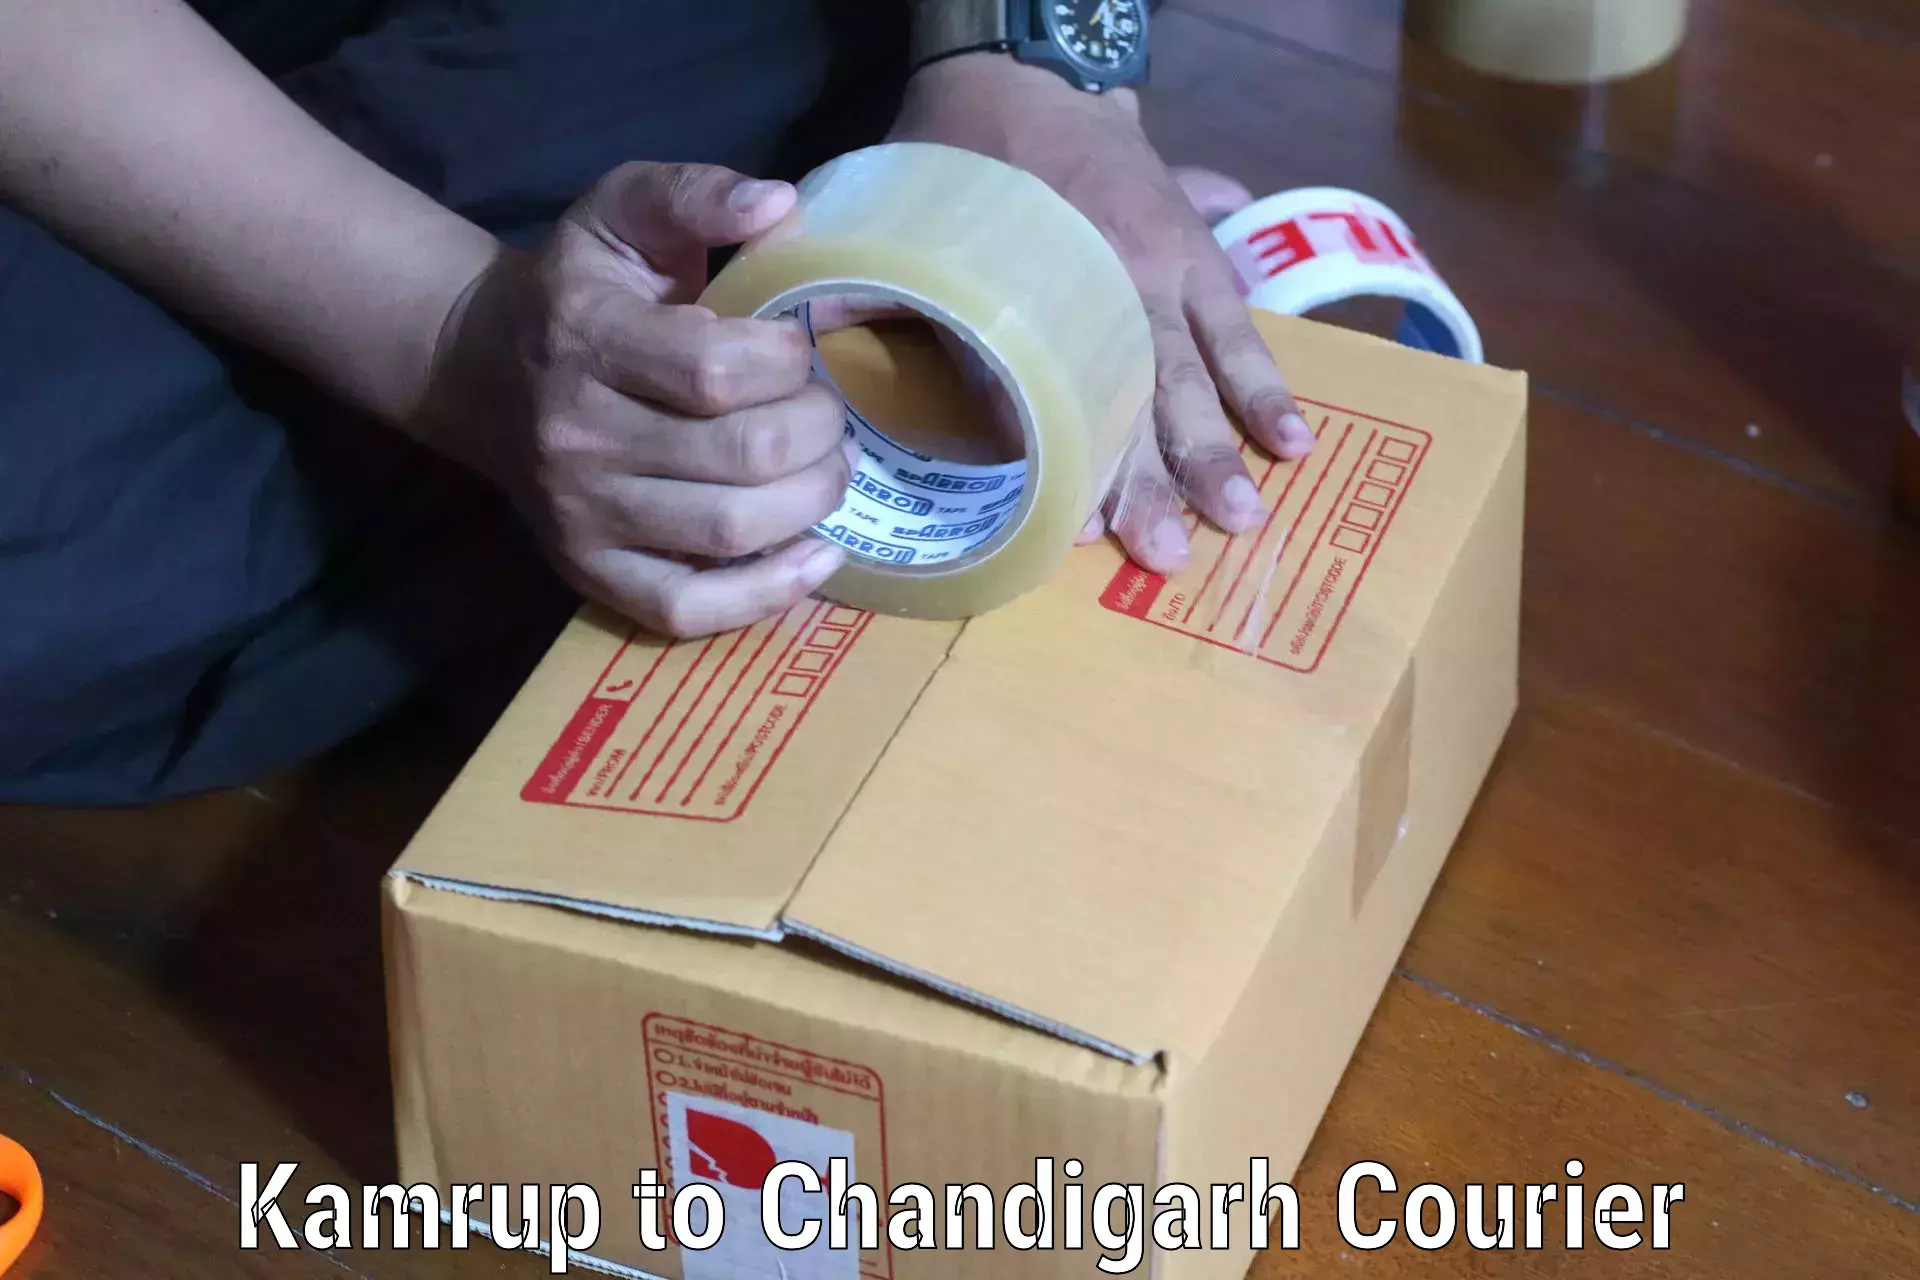 Multi-city courier Kamrup to Chandigarh